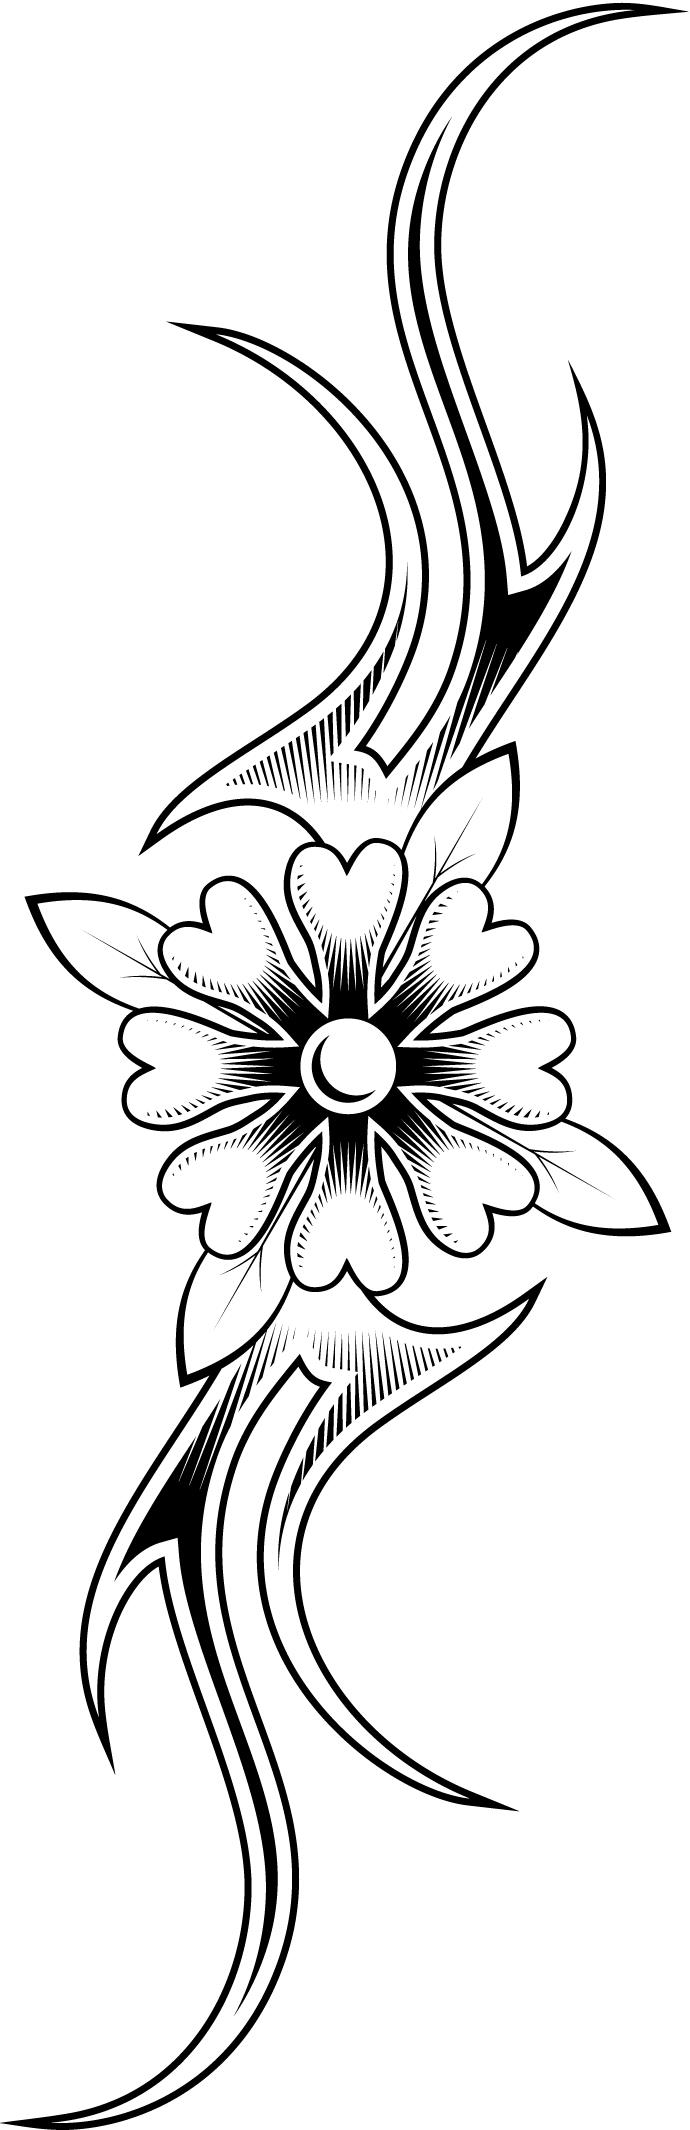 working page of a floral tattoo design for kids - Coloring Point